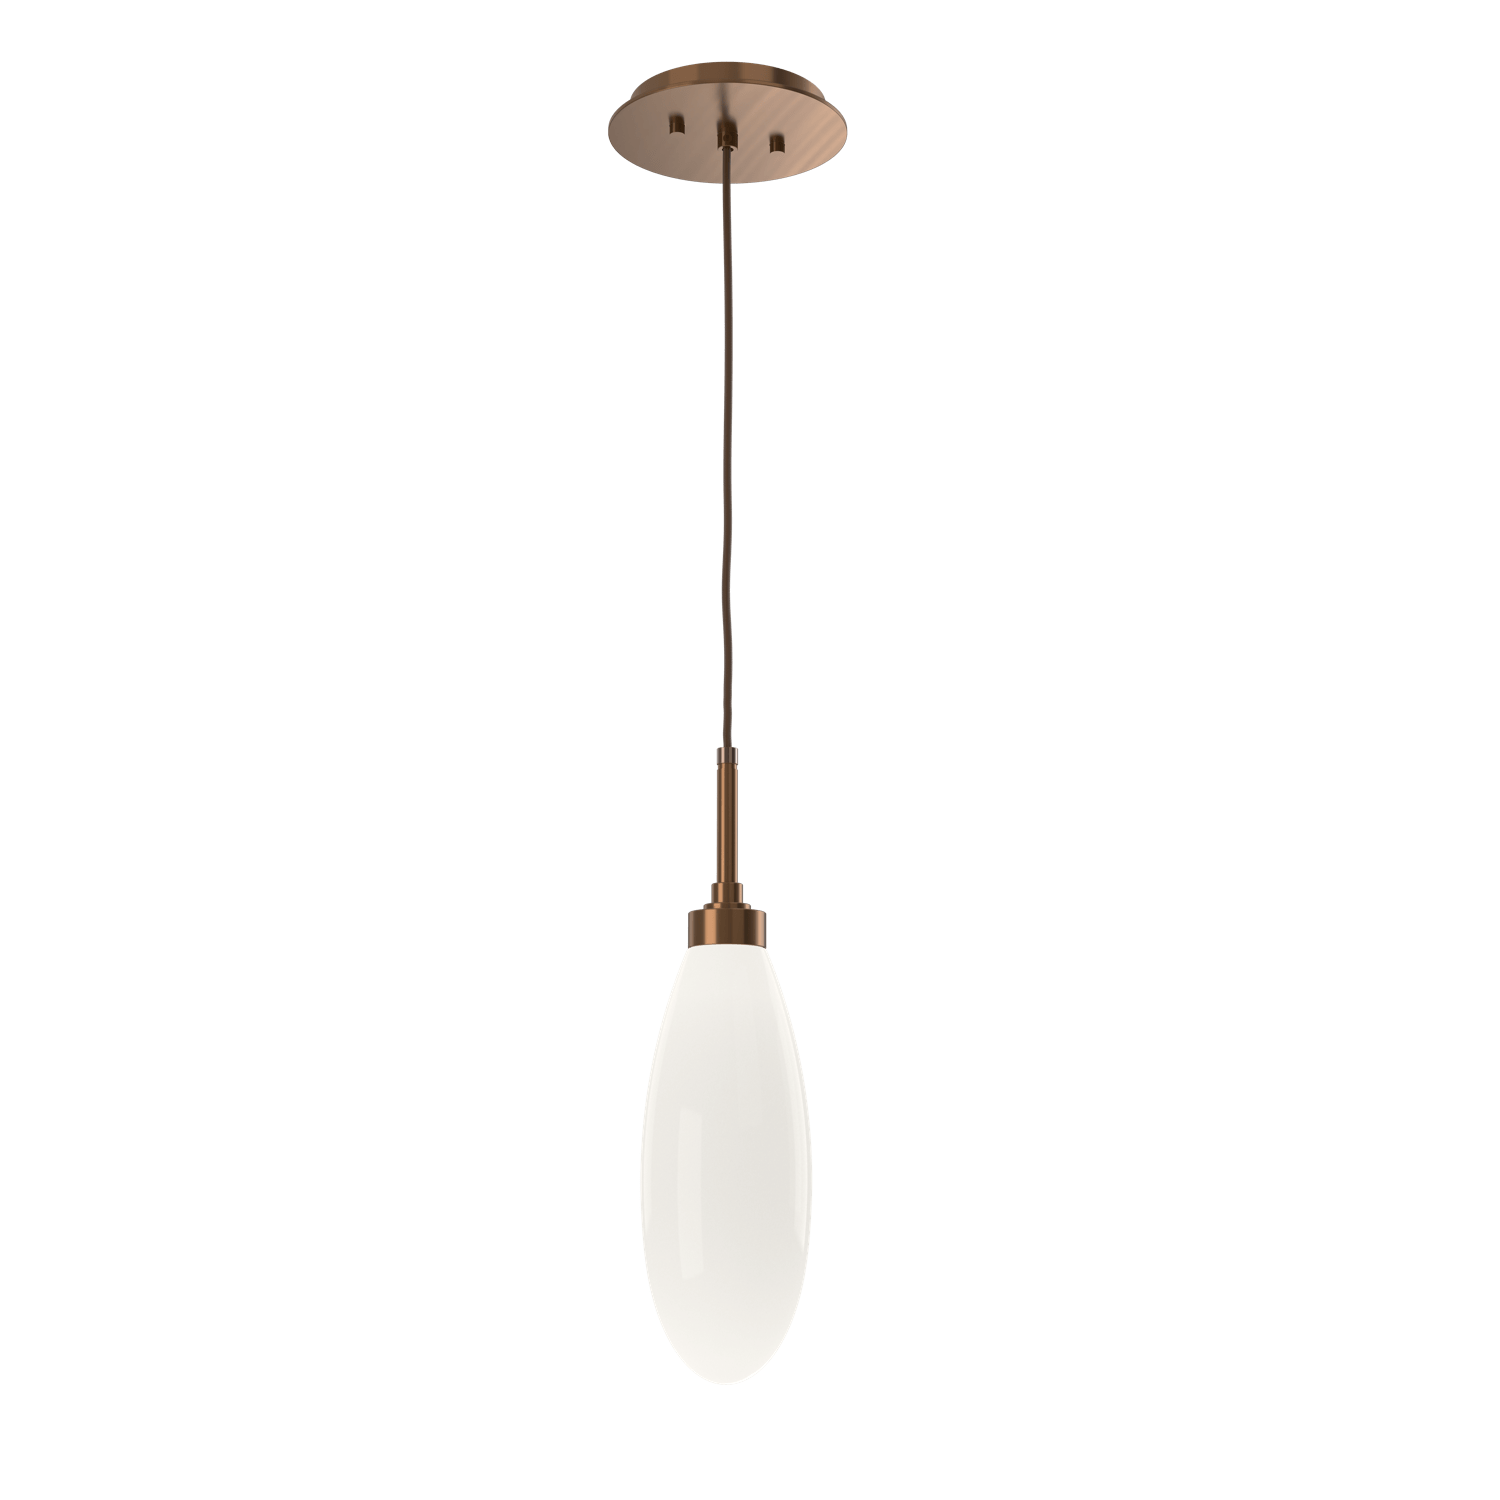 LAB0071-15-RB-WL-LL-Hammerton-Studio-Fiori-pendant-light-with-oil-rubbed-bronze-finish-and-opal-white-glass-shades-and-LED-lamping